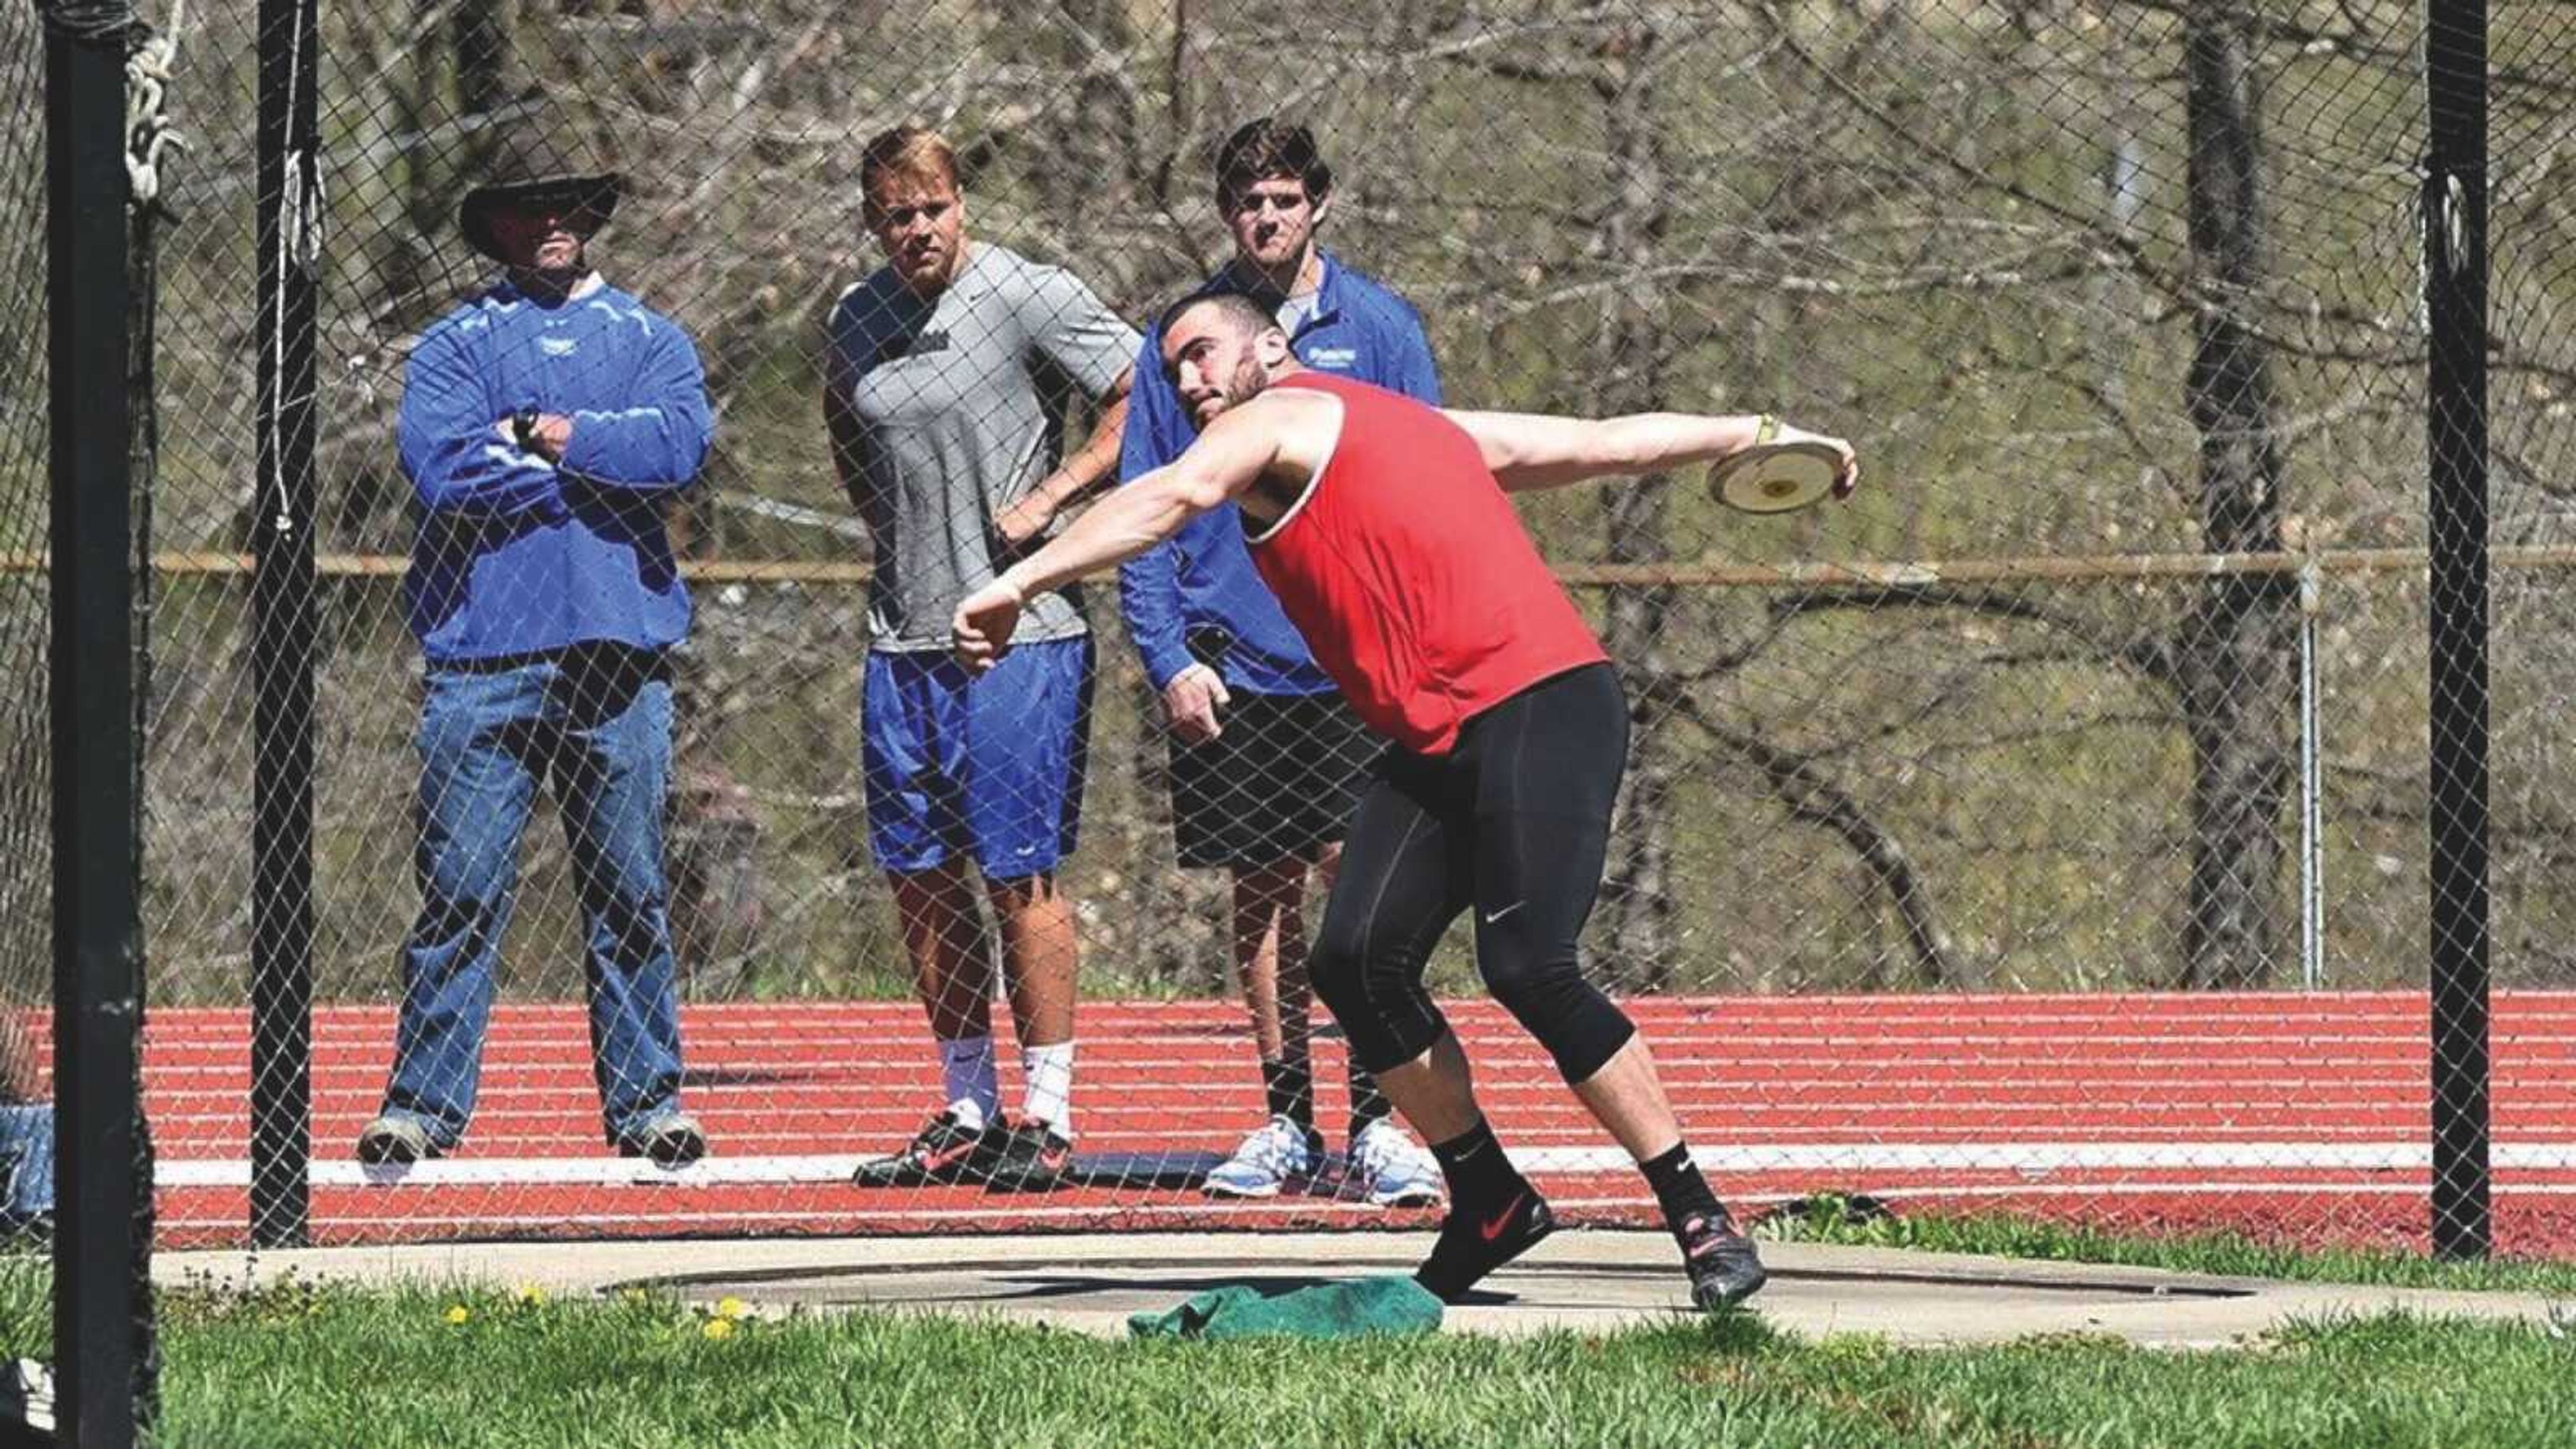 Senior thrower Jason Walker competes in the discus event of an outdoor track and field competition last season.